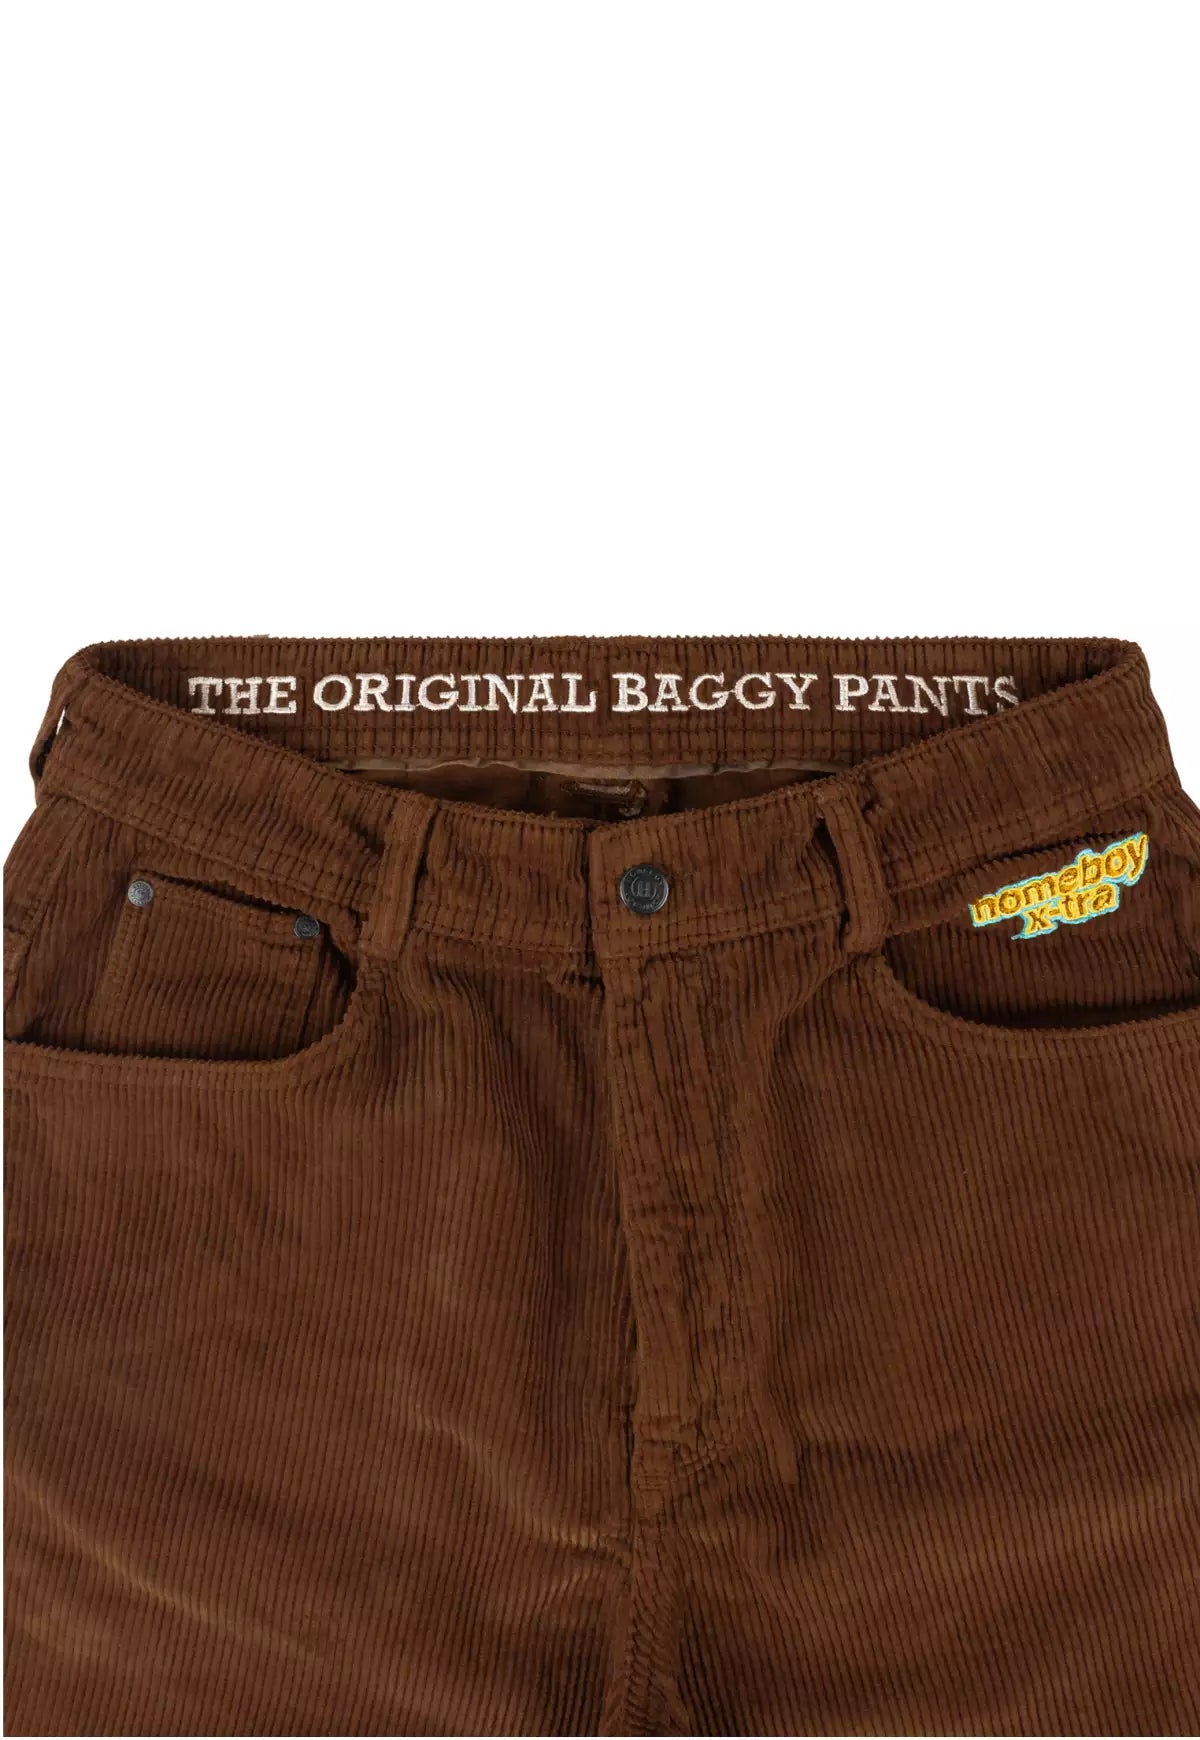 HOMEBOY - X-TRA BAGGY CORD PANT - BROWN